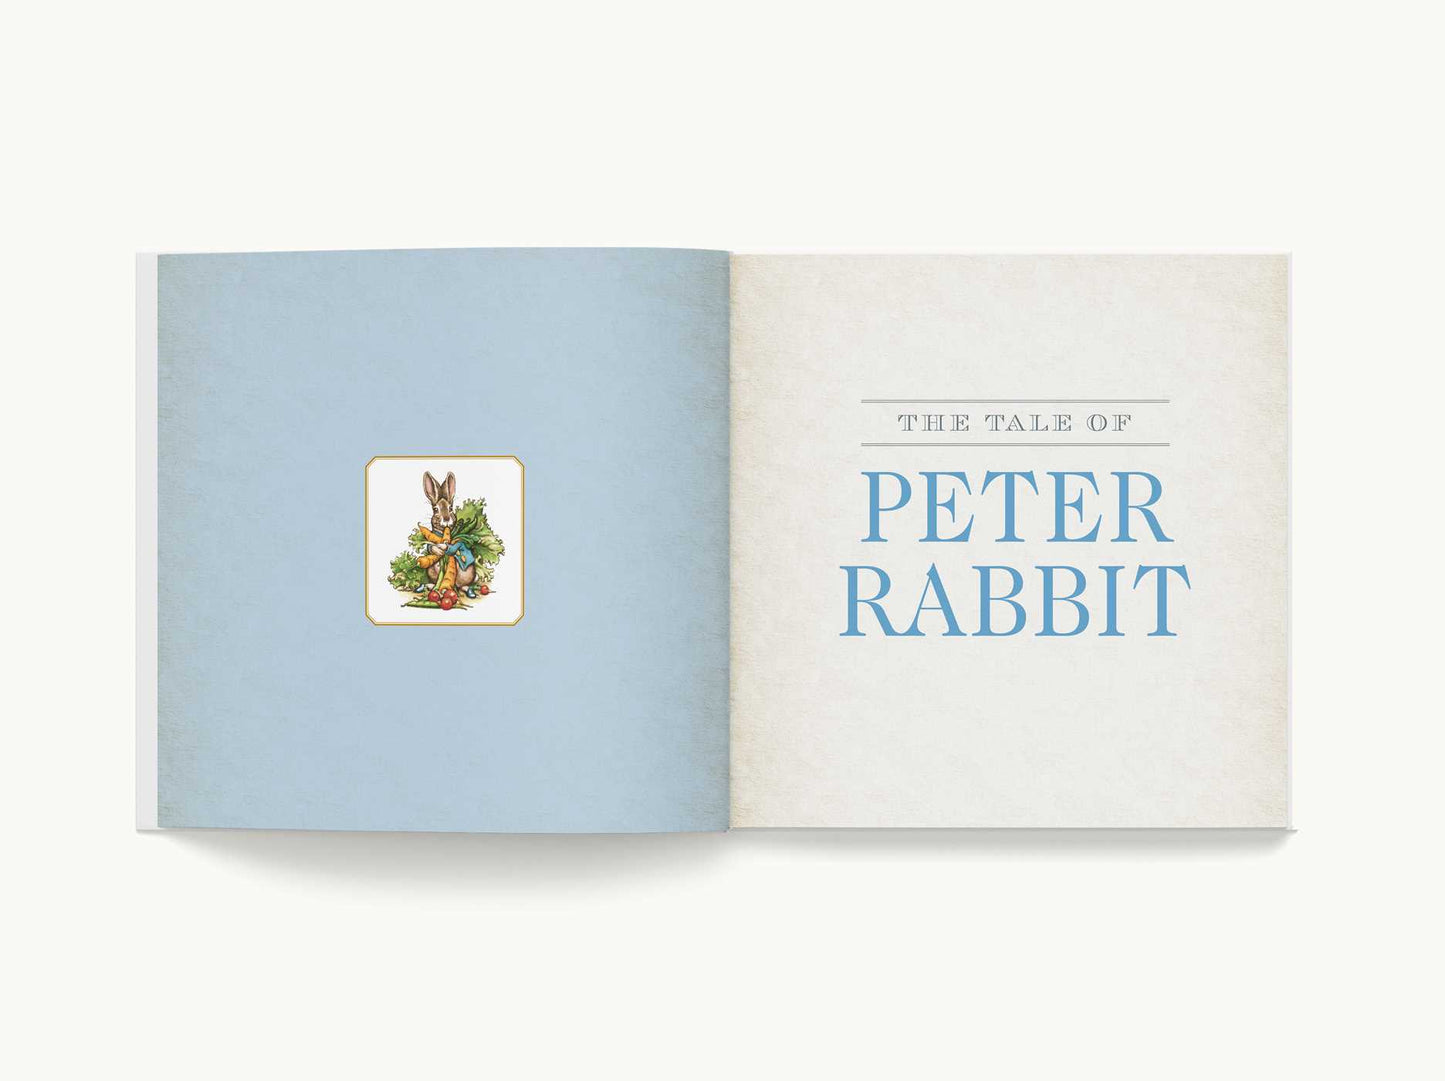 The Classic Tale of Peter Rabbit Heirloom Edition: The Classic Edition Hardcover with Audio CD Narrated by Jeff Bridges